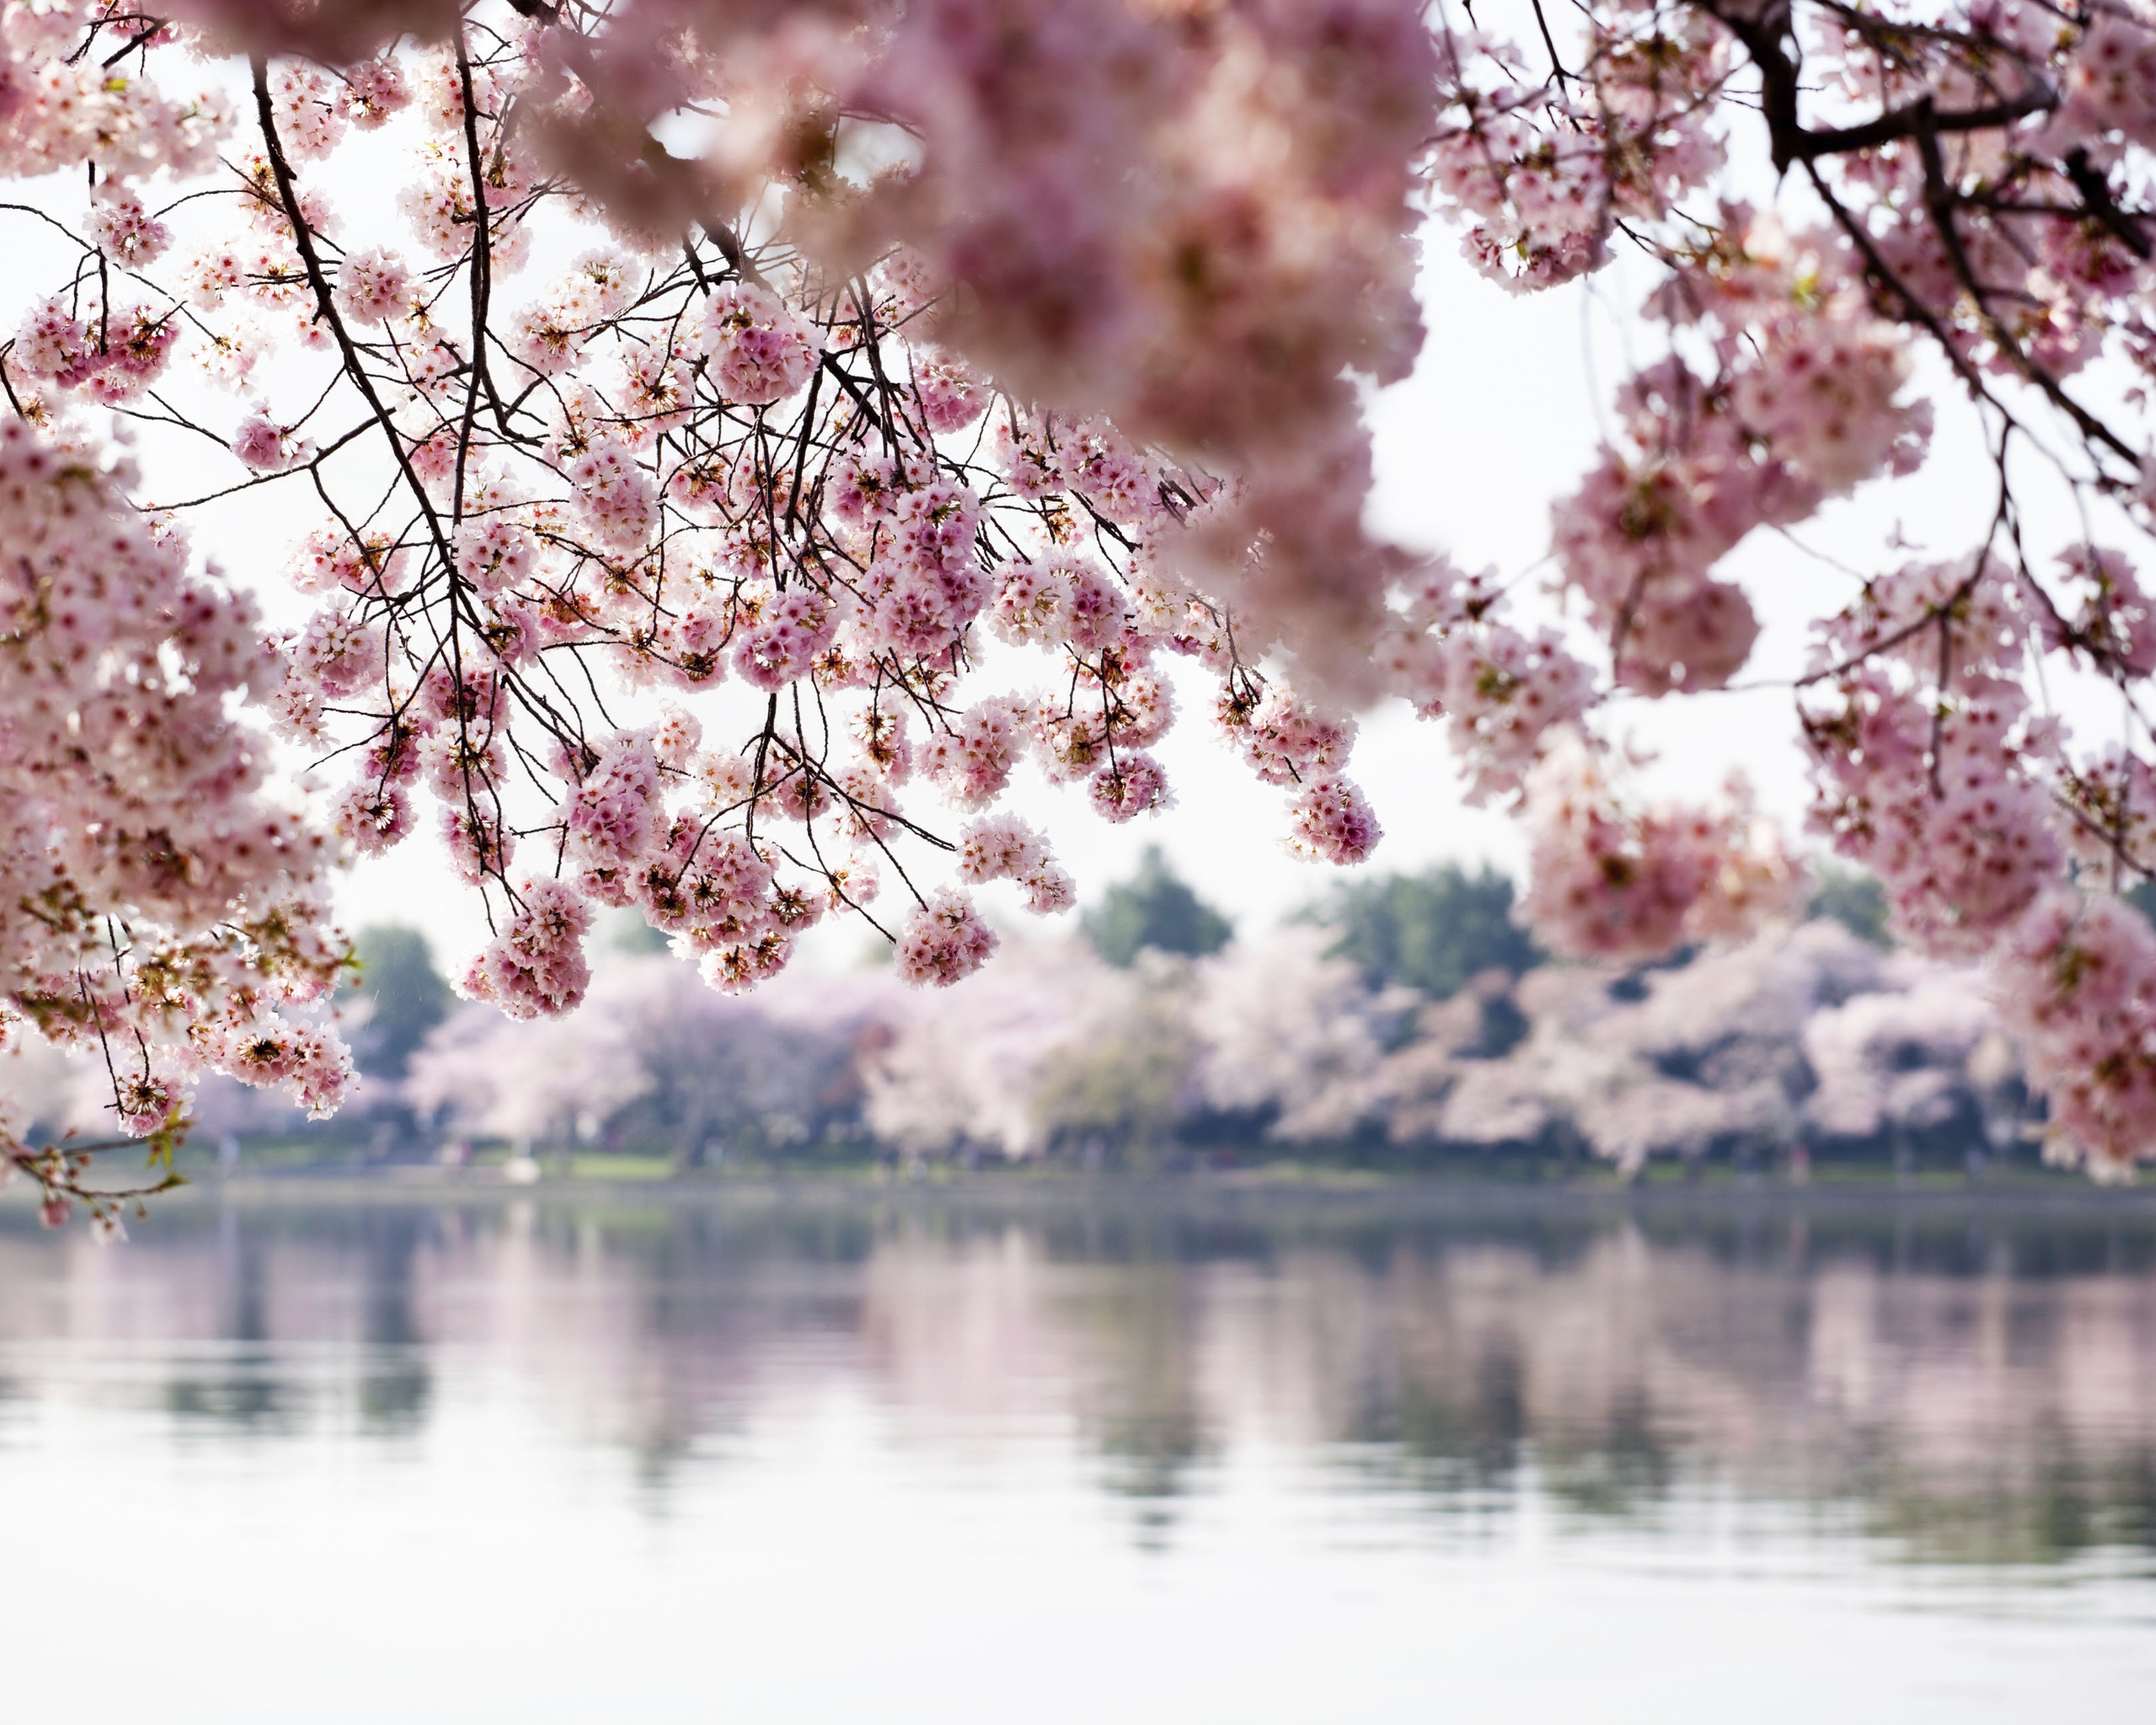 Image: River, water, apple, bloom, flowers, branches, reflection, trees, spring